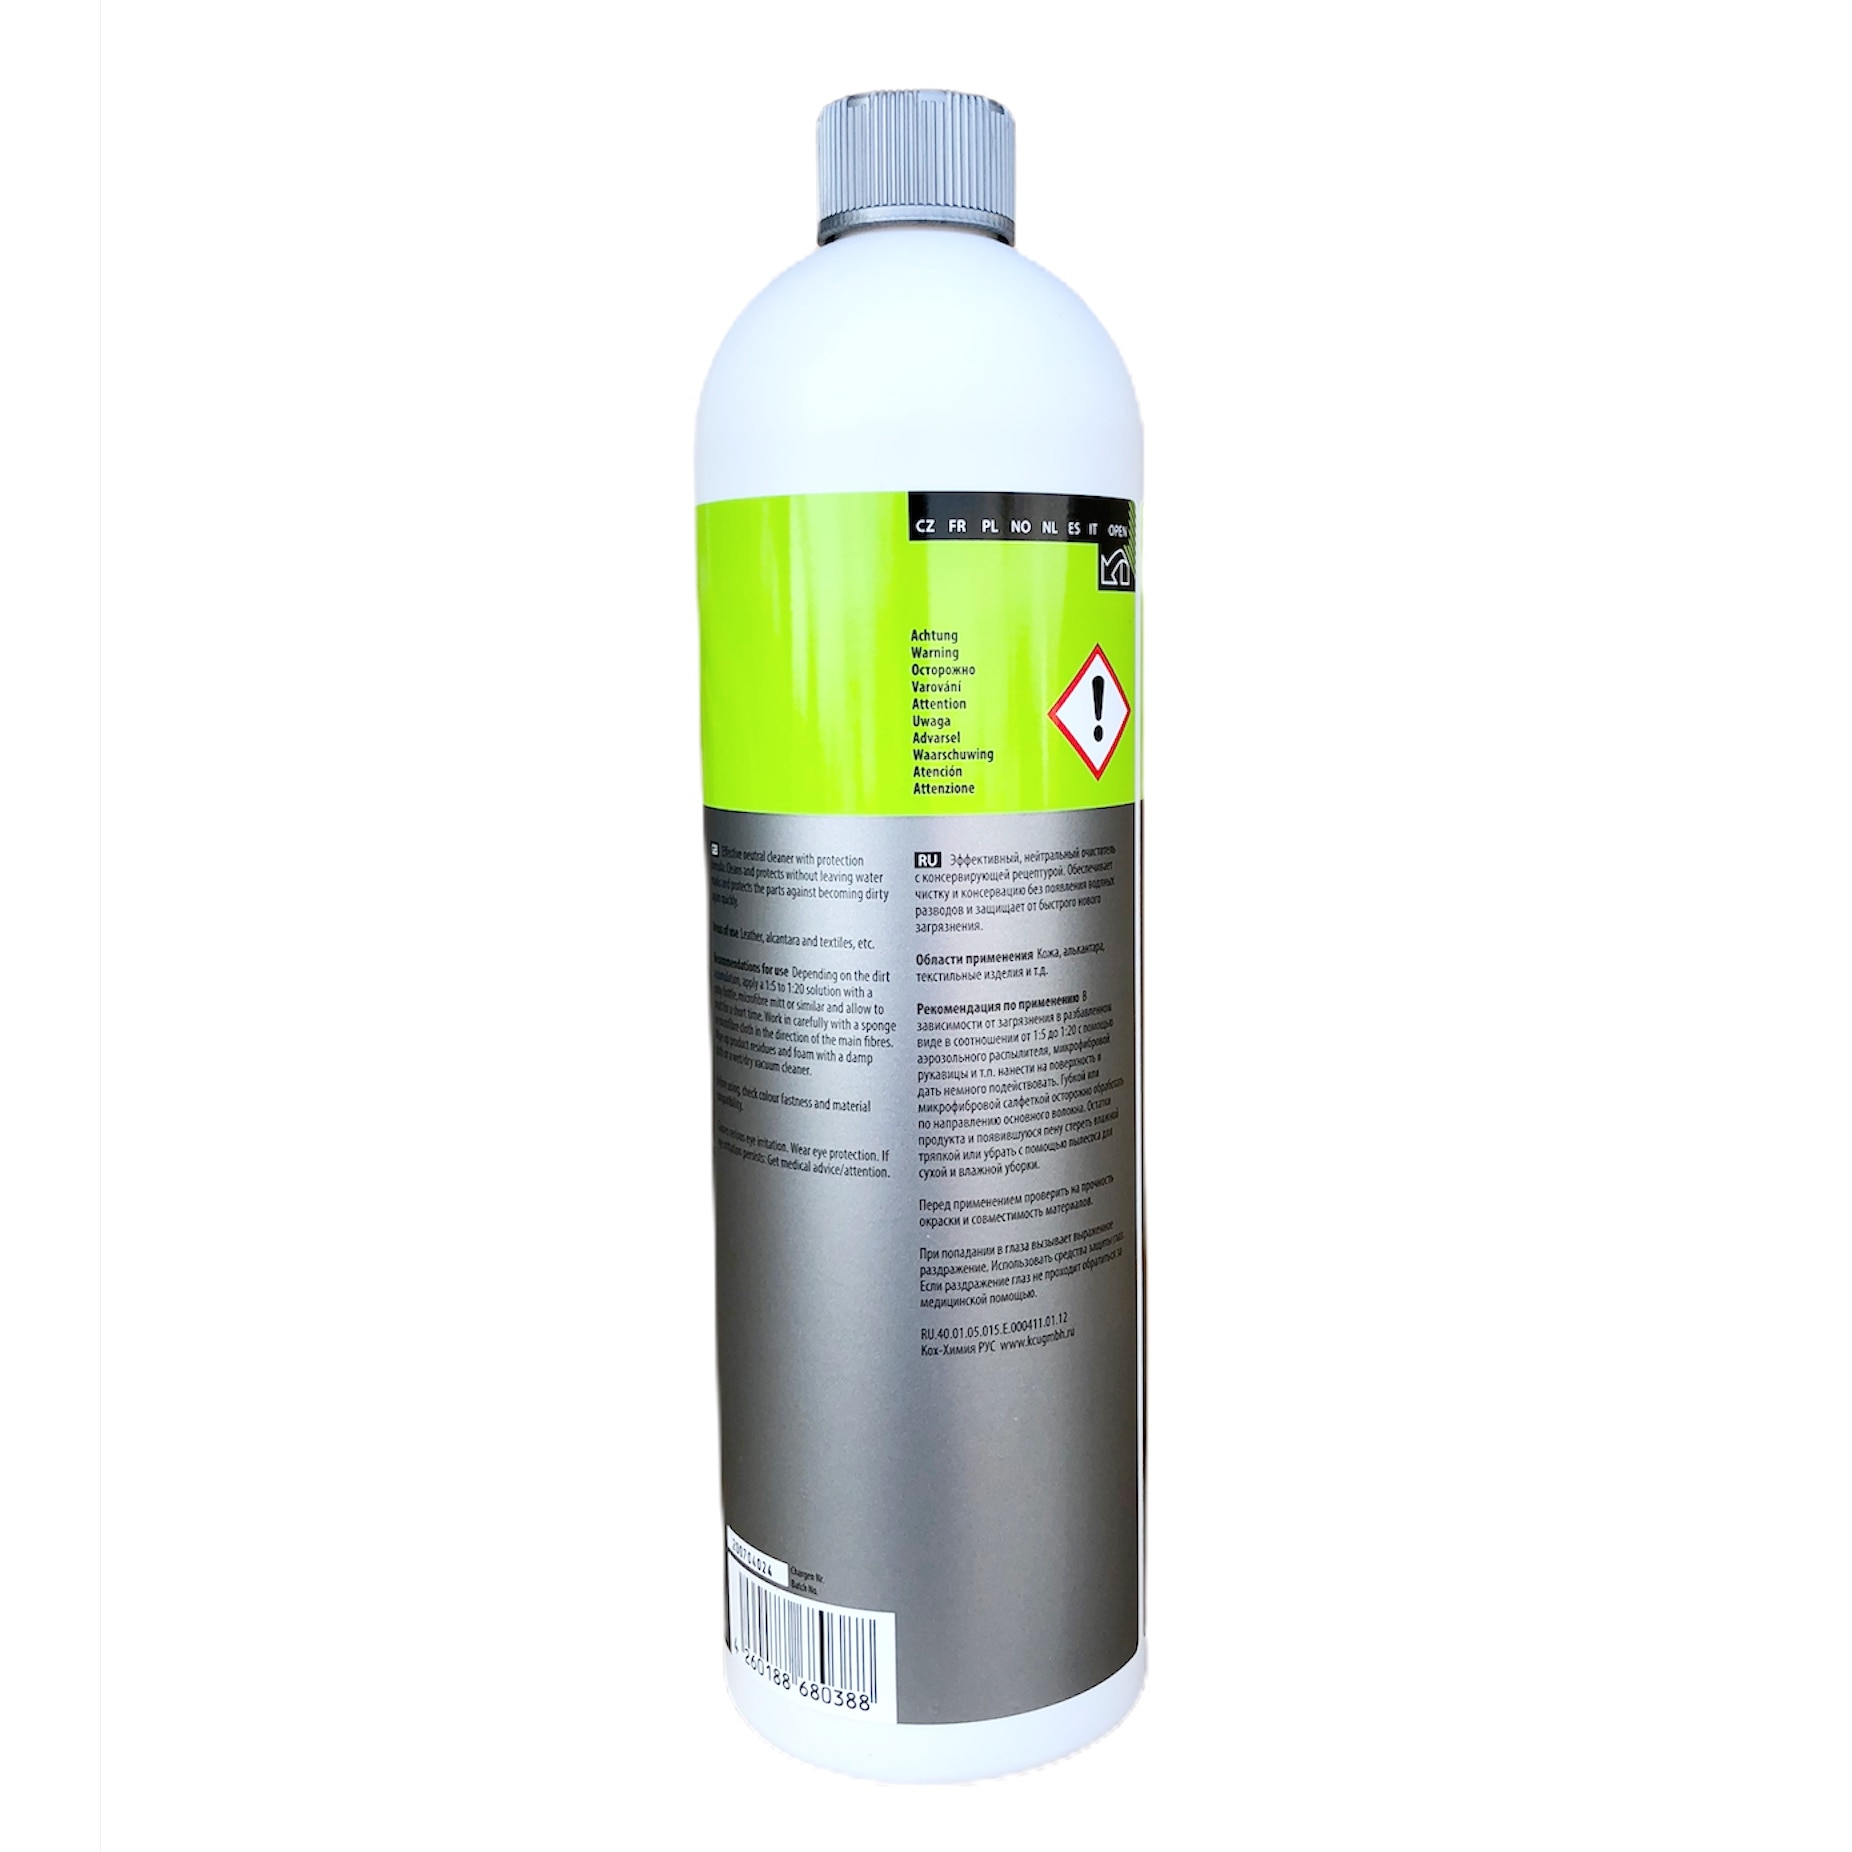 Koch Chemie Pol Star Interior Leather and Textile Cleaner 1 Liter